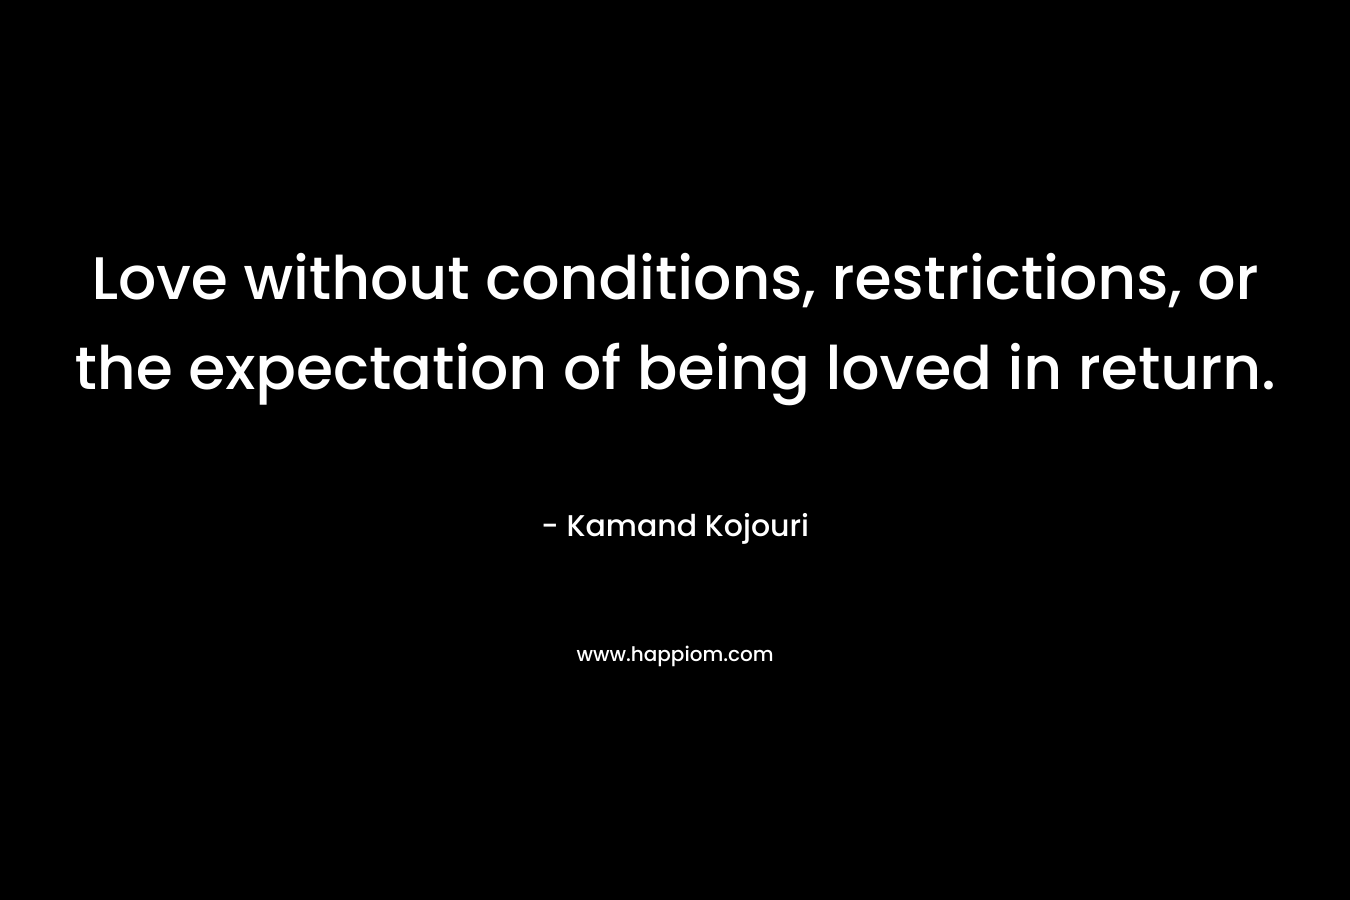 Love without conditions, restrictions, or the expectation of being loved in return.